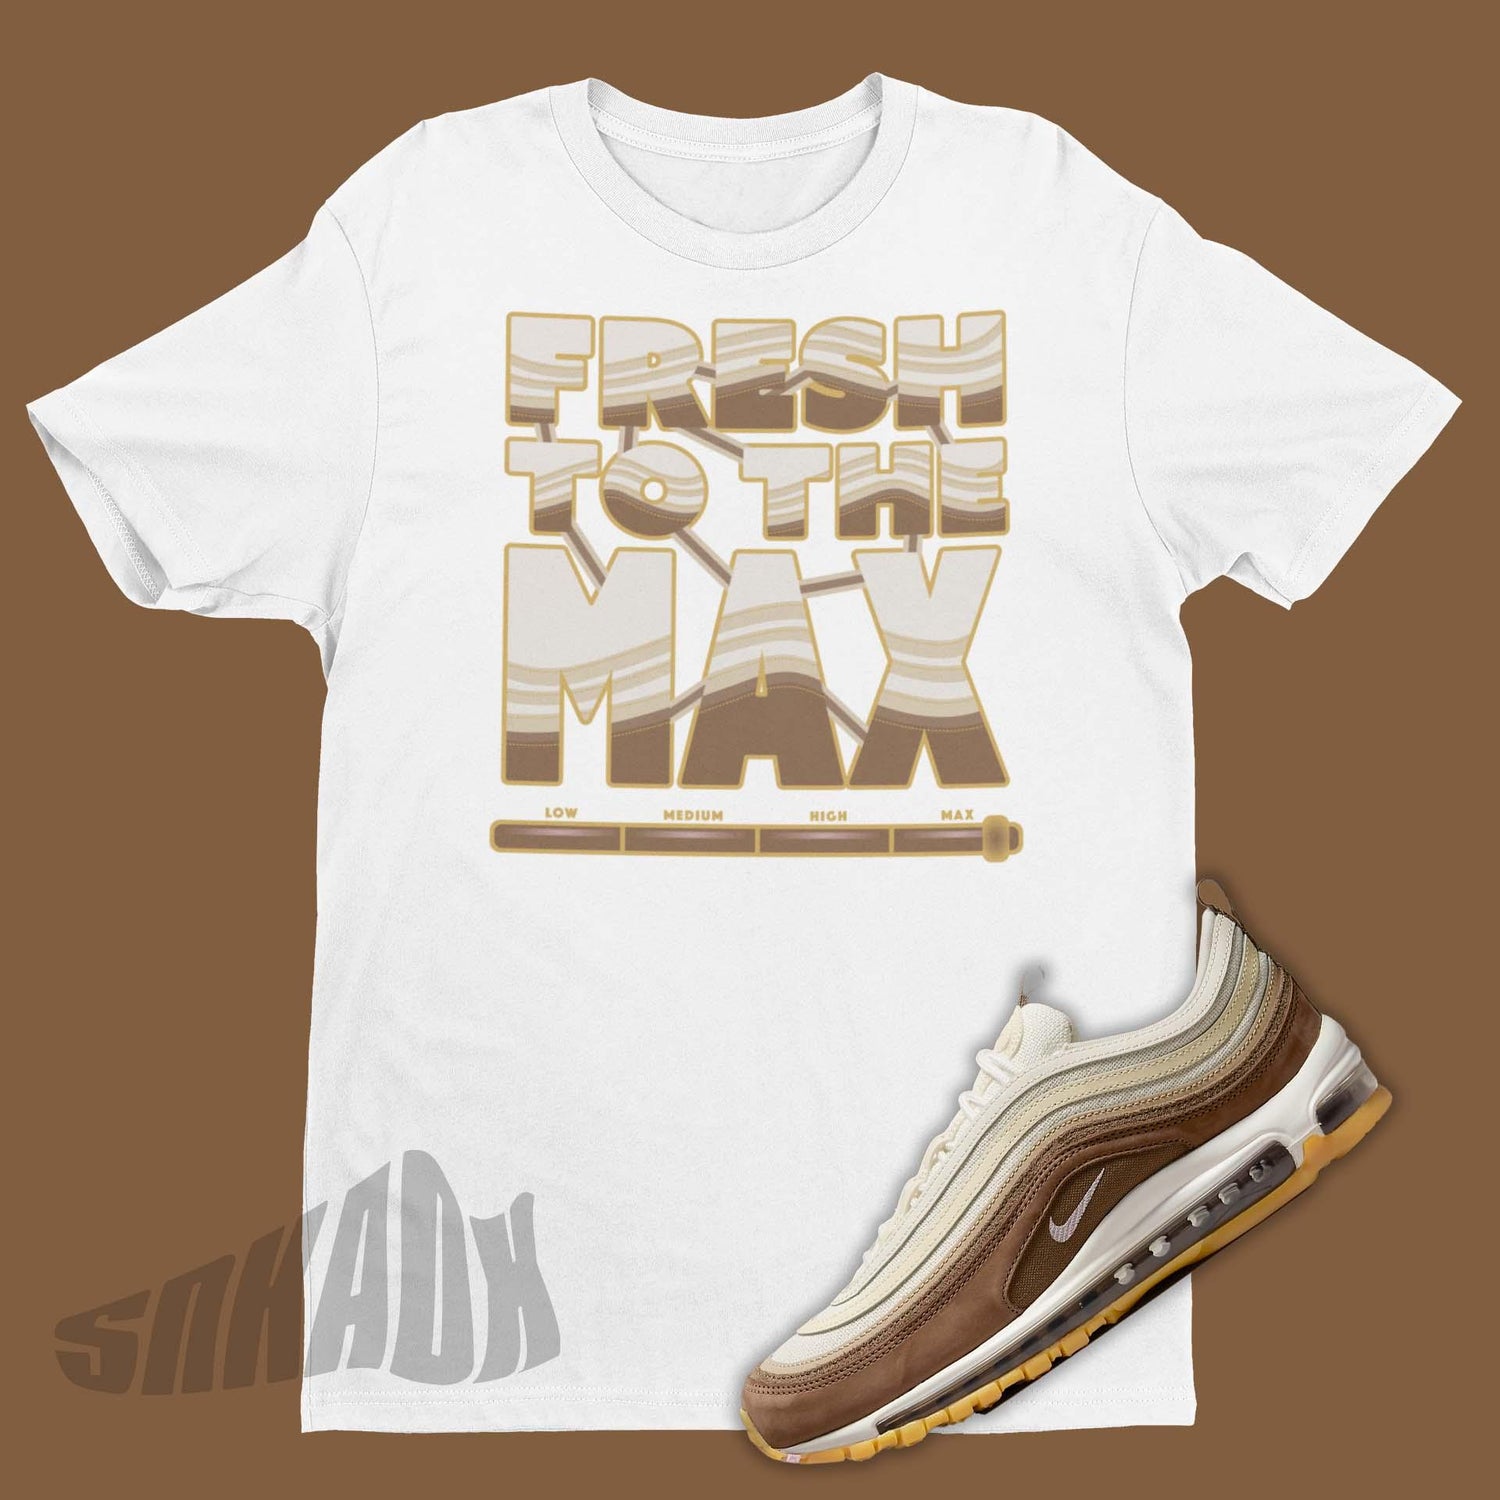 Fresh To The Max Shirt To Match Nike Air Max 97 Muslin and Pink Foam